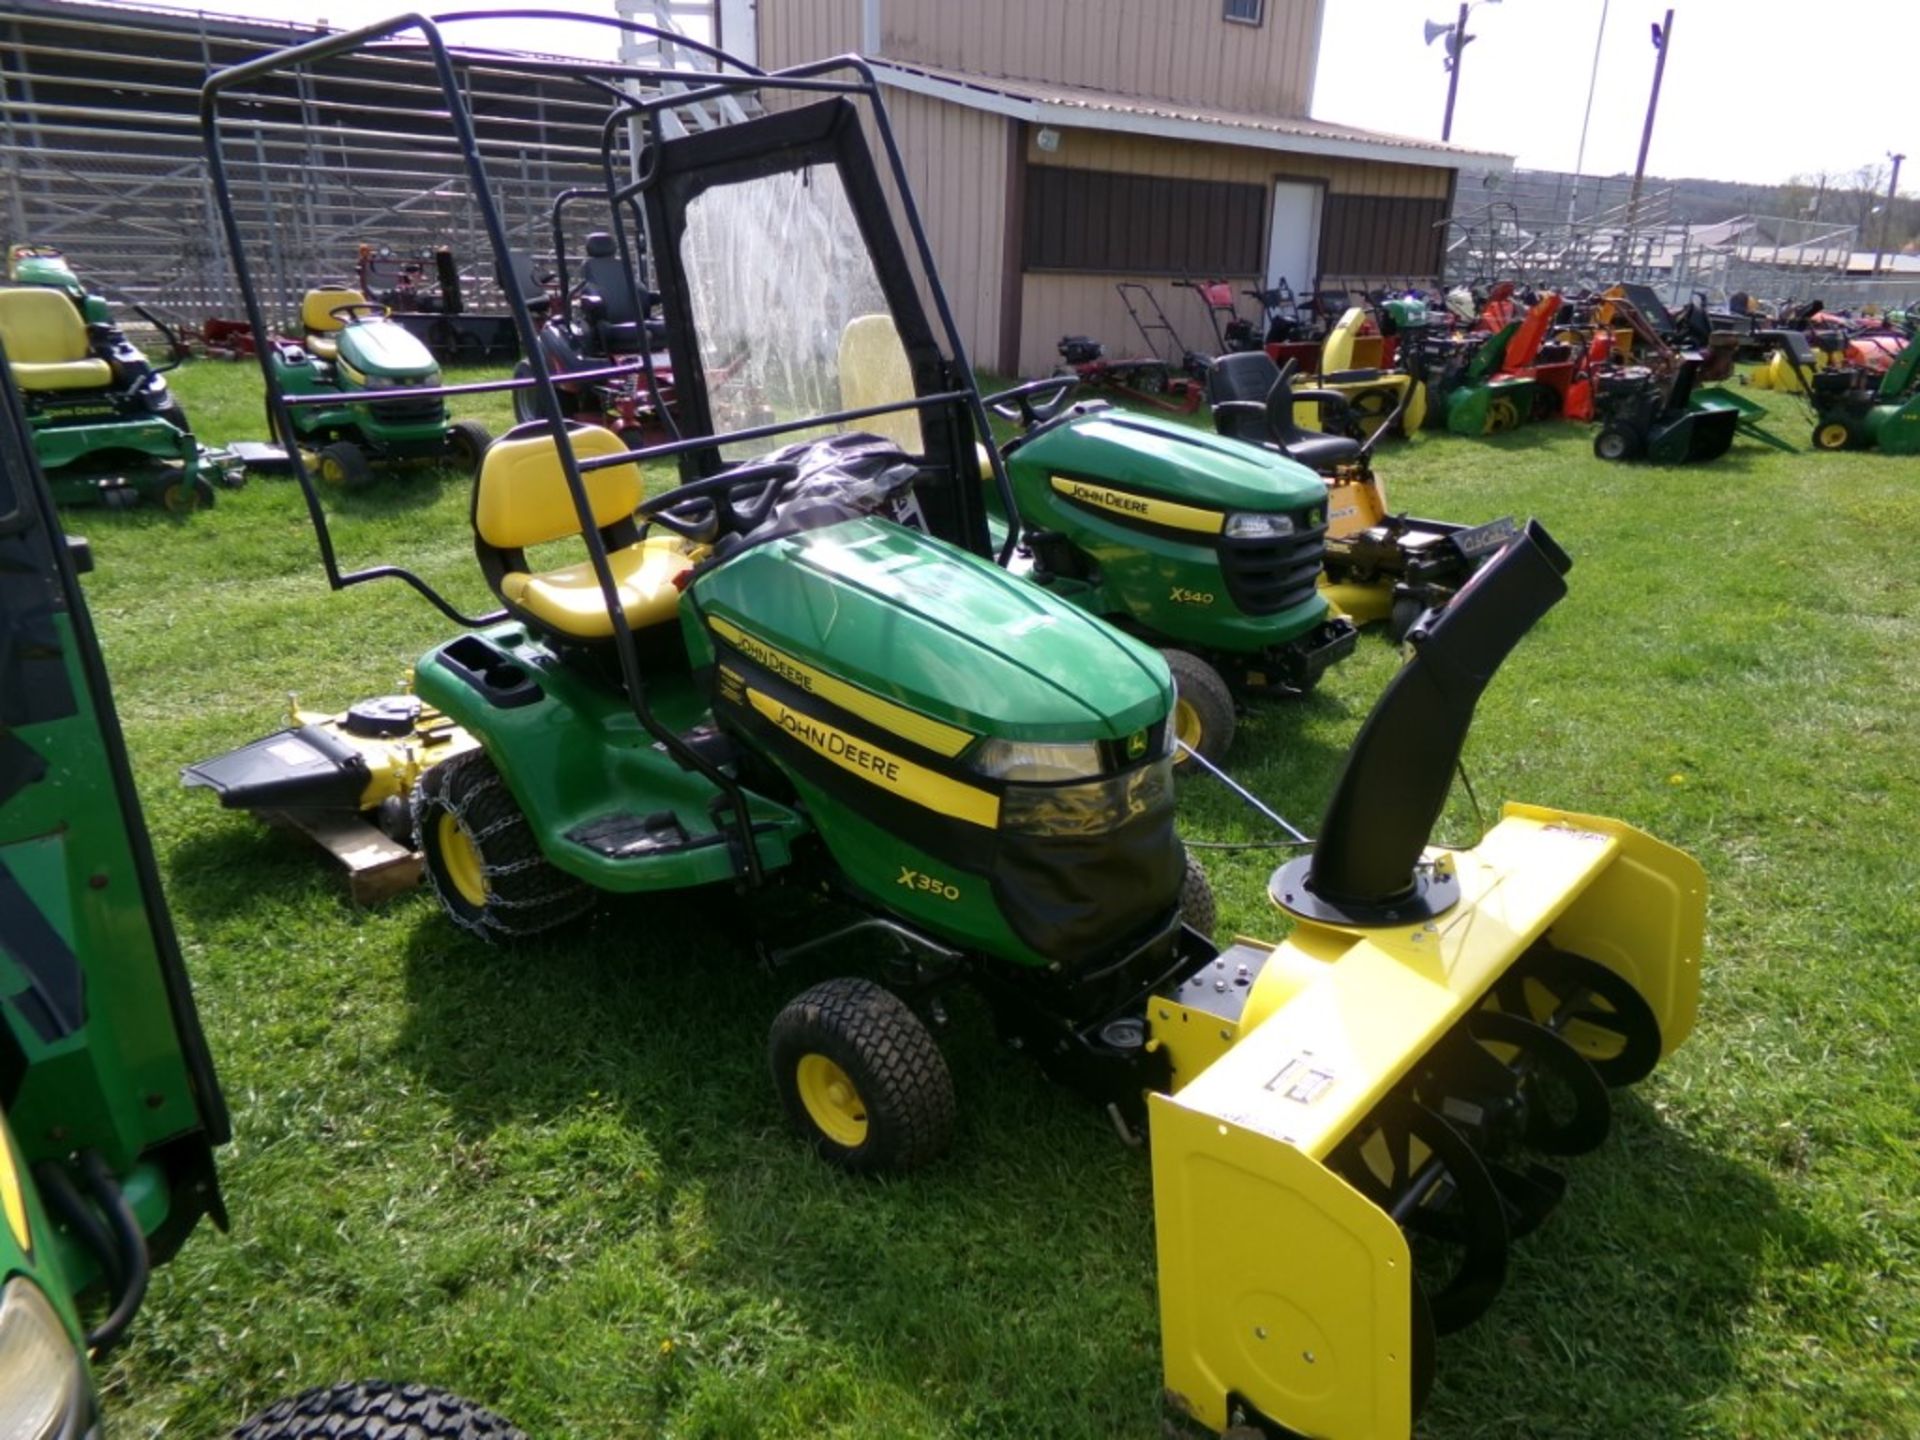 John Deere X350 44'' Snow Blower with Soft Cab, 18 HP with 48'' Deck, Chains and Weights, 225 Hrs. - Image 2 of 3